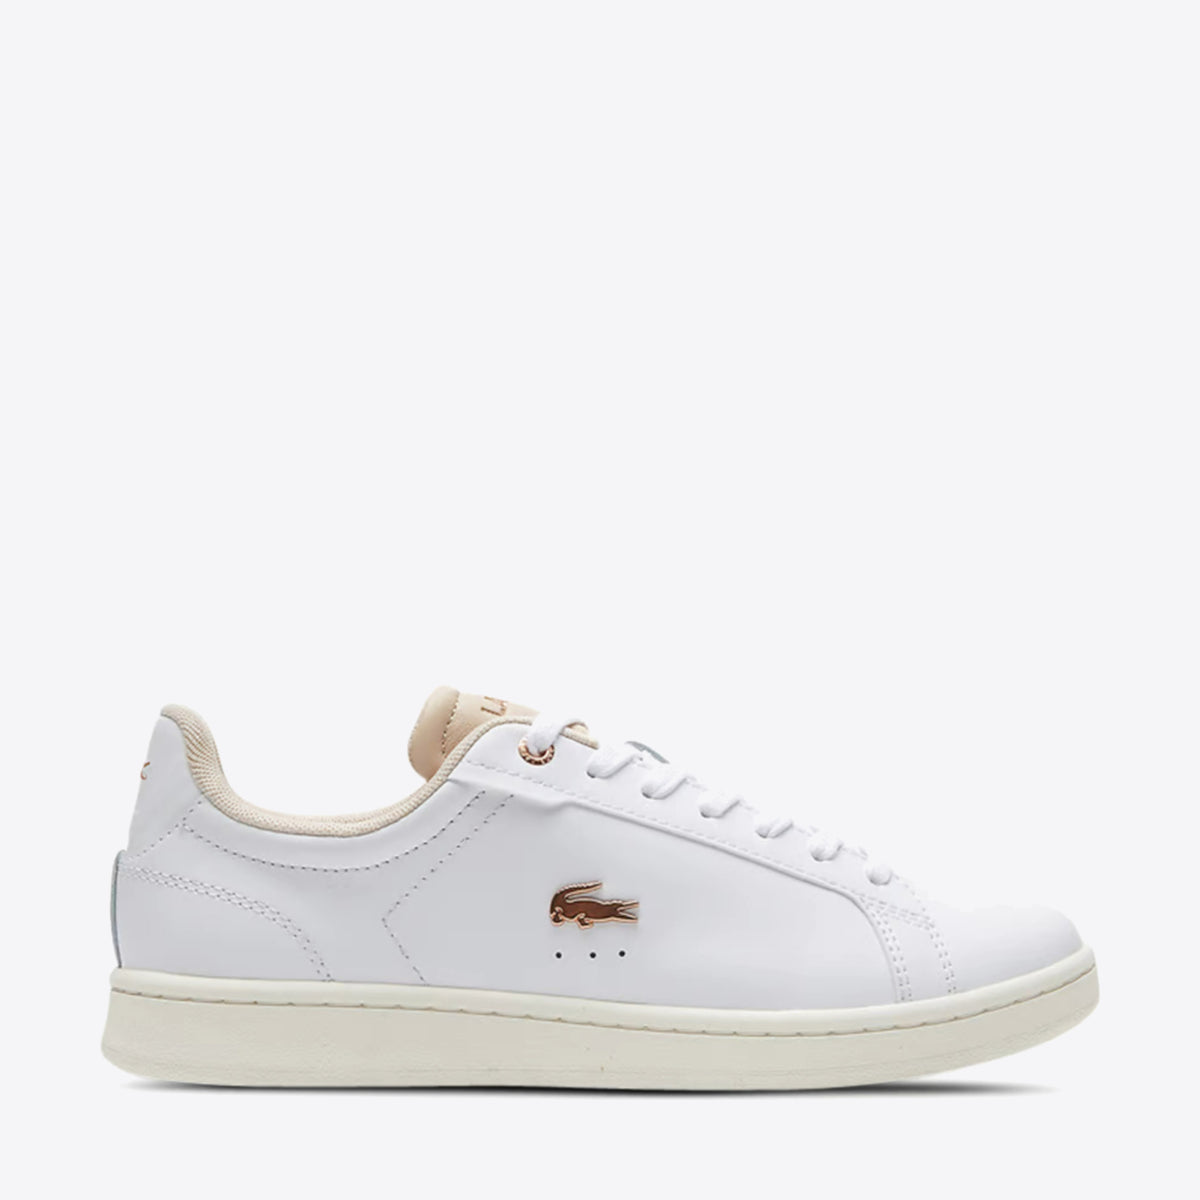  Carnaby Pro - Women's White/Off White